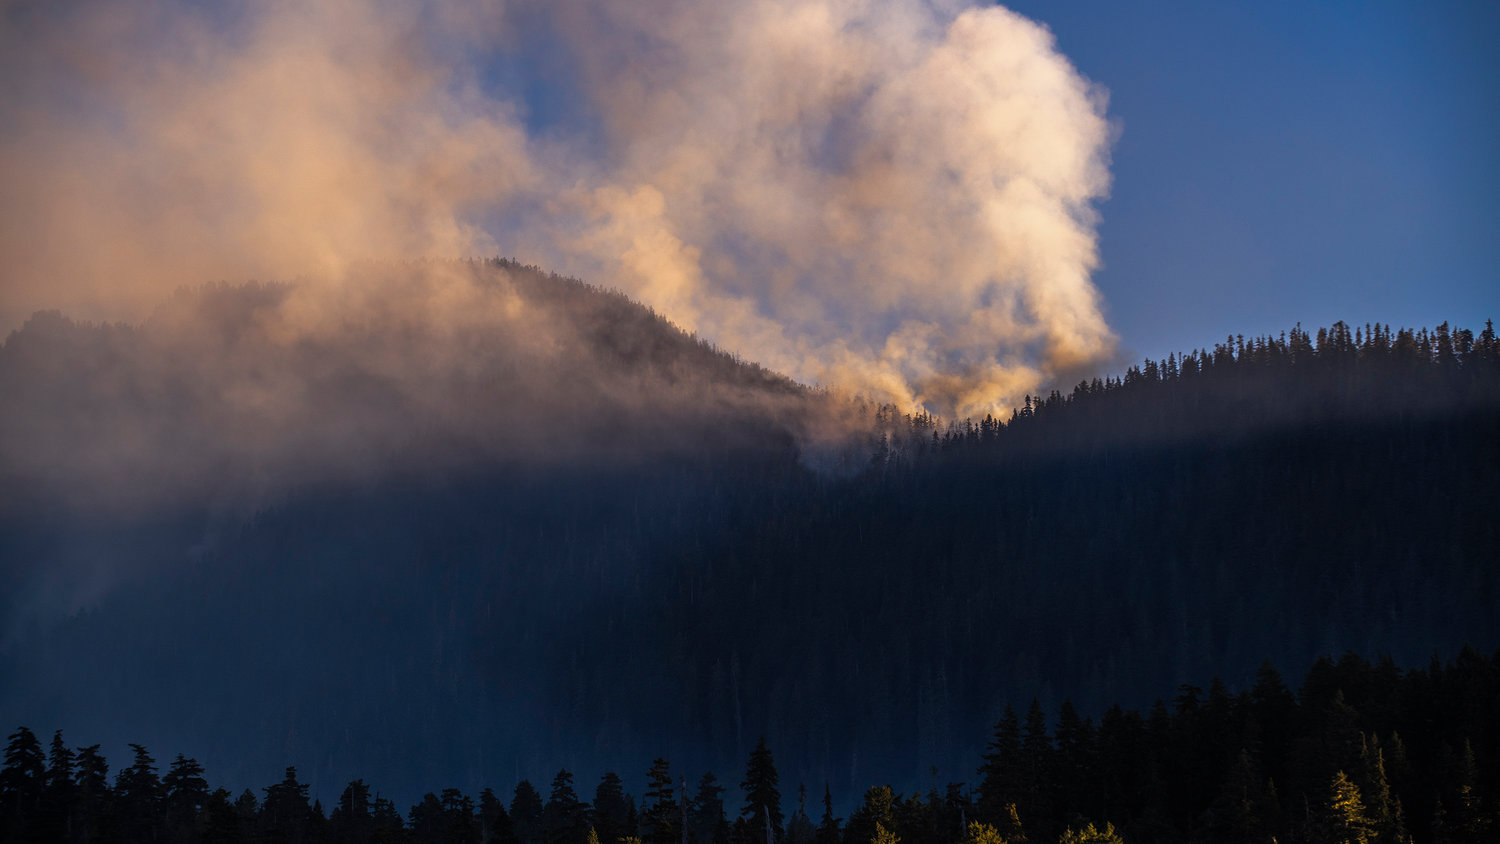 The Goat Rocks Fire smolders and burns east of Packwood on Tuesday seen from U.S. Highway 12.